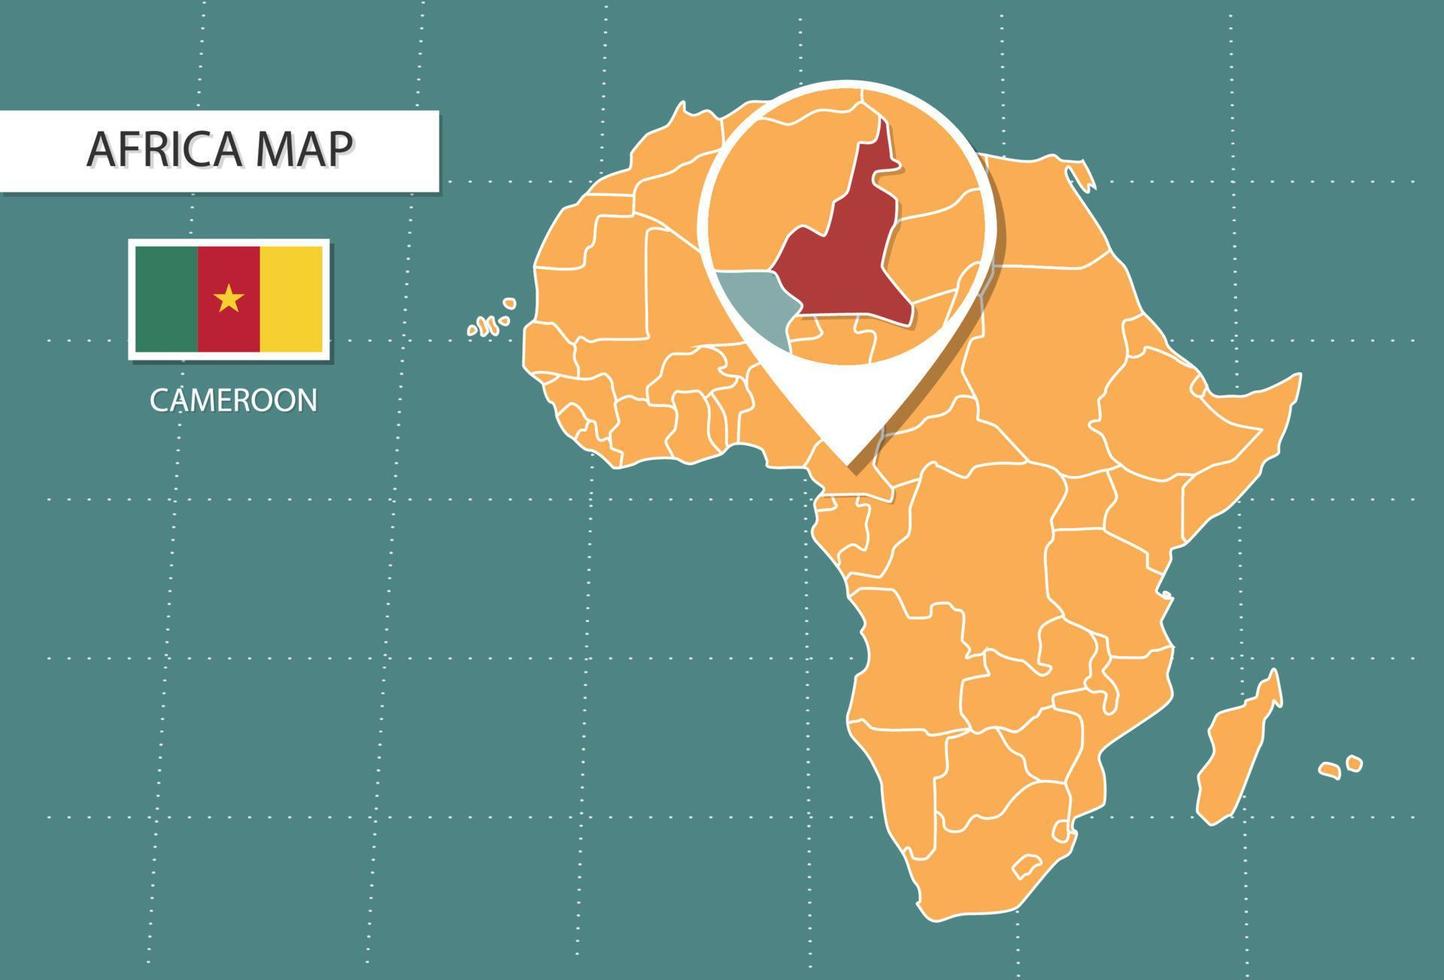 Cameroon map in Africa zoom version, icons showing Cameroon location and flags. vector